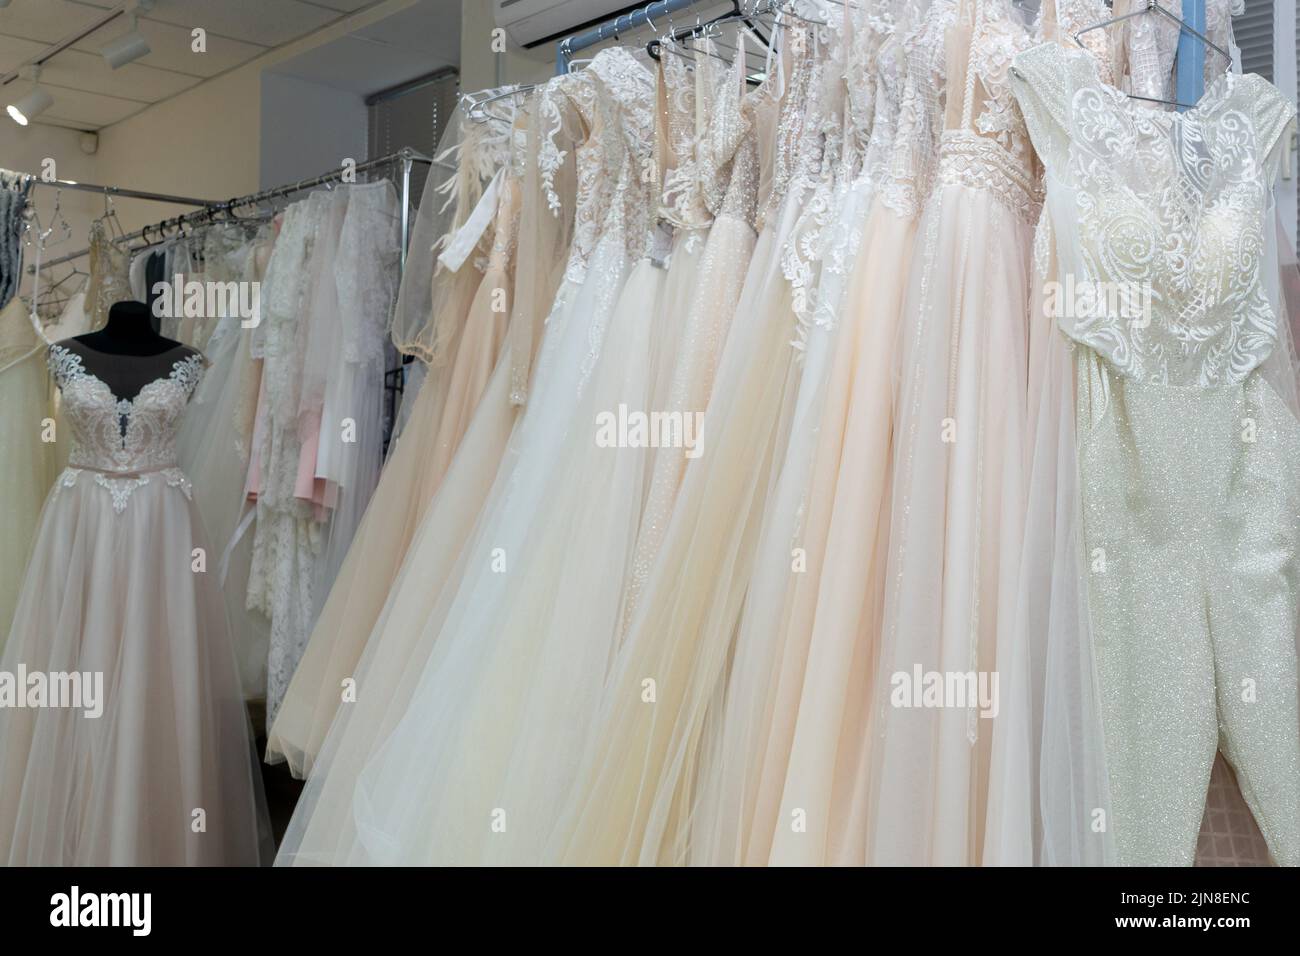 White and cream wedding dresses on a hanger in a bridal boutique. Close up. Stock Photo